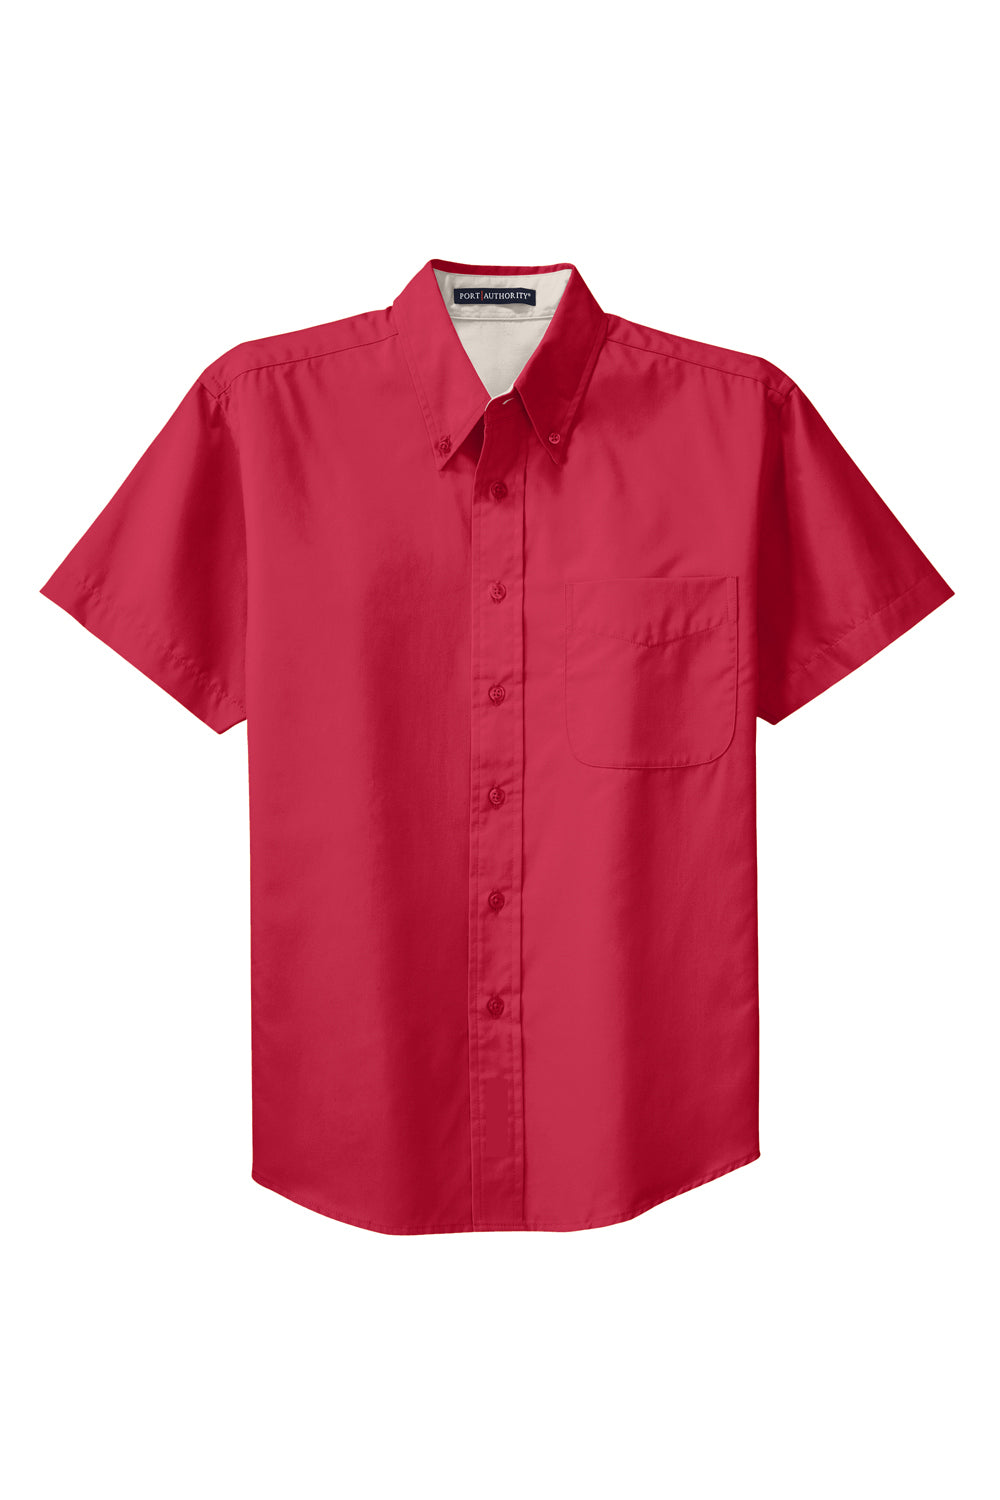 Port Authority S508/TLS508 Mens Easy Care Wrinkle Resistant Short Sleeve Button Down Shirt w/ Pocket Red Flat Front